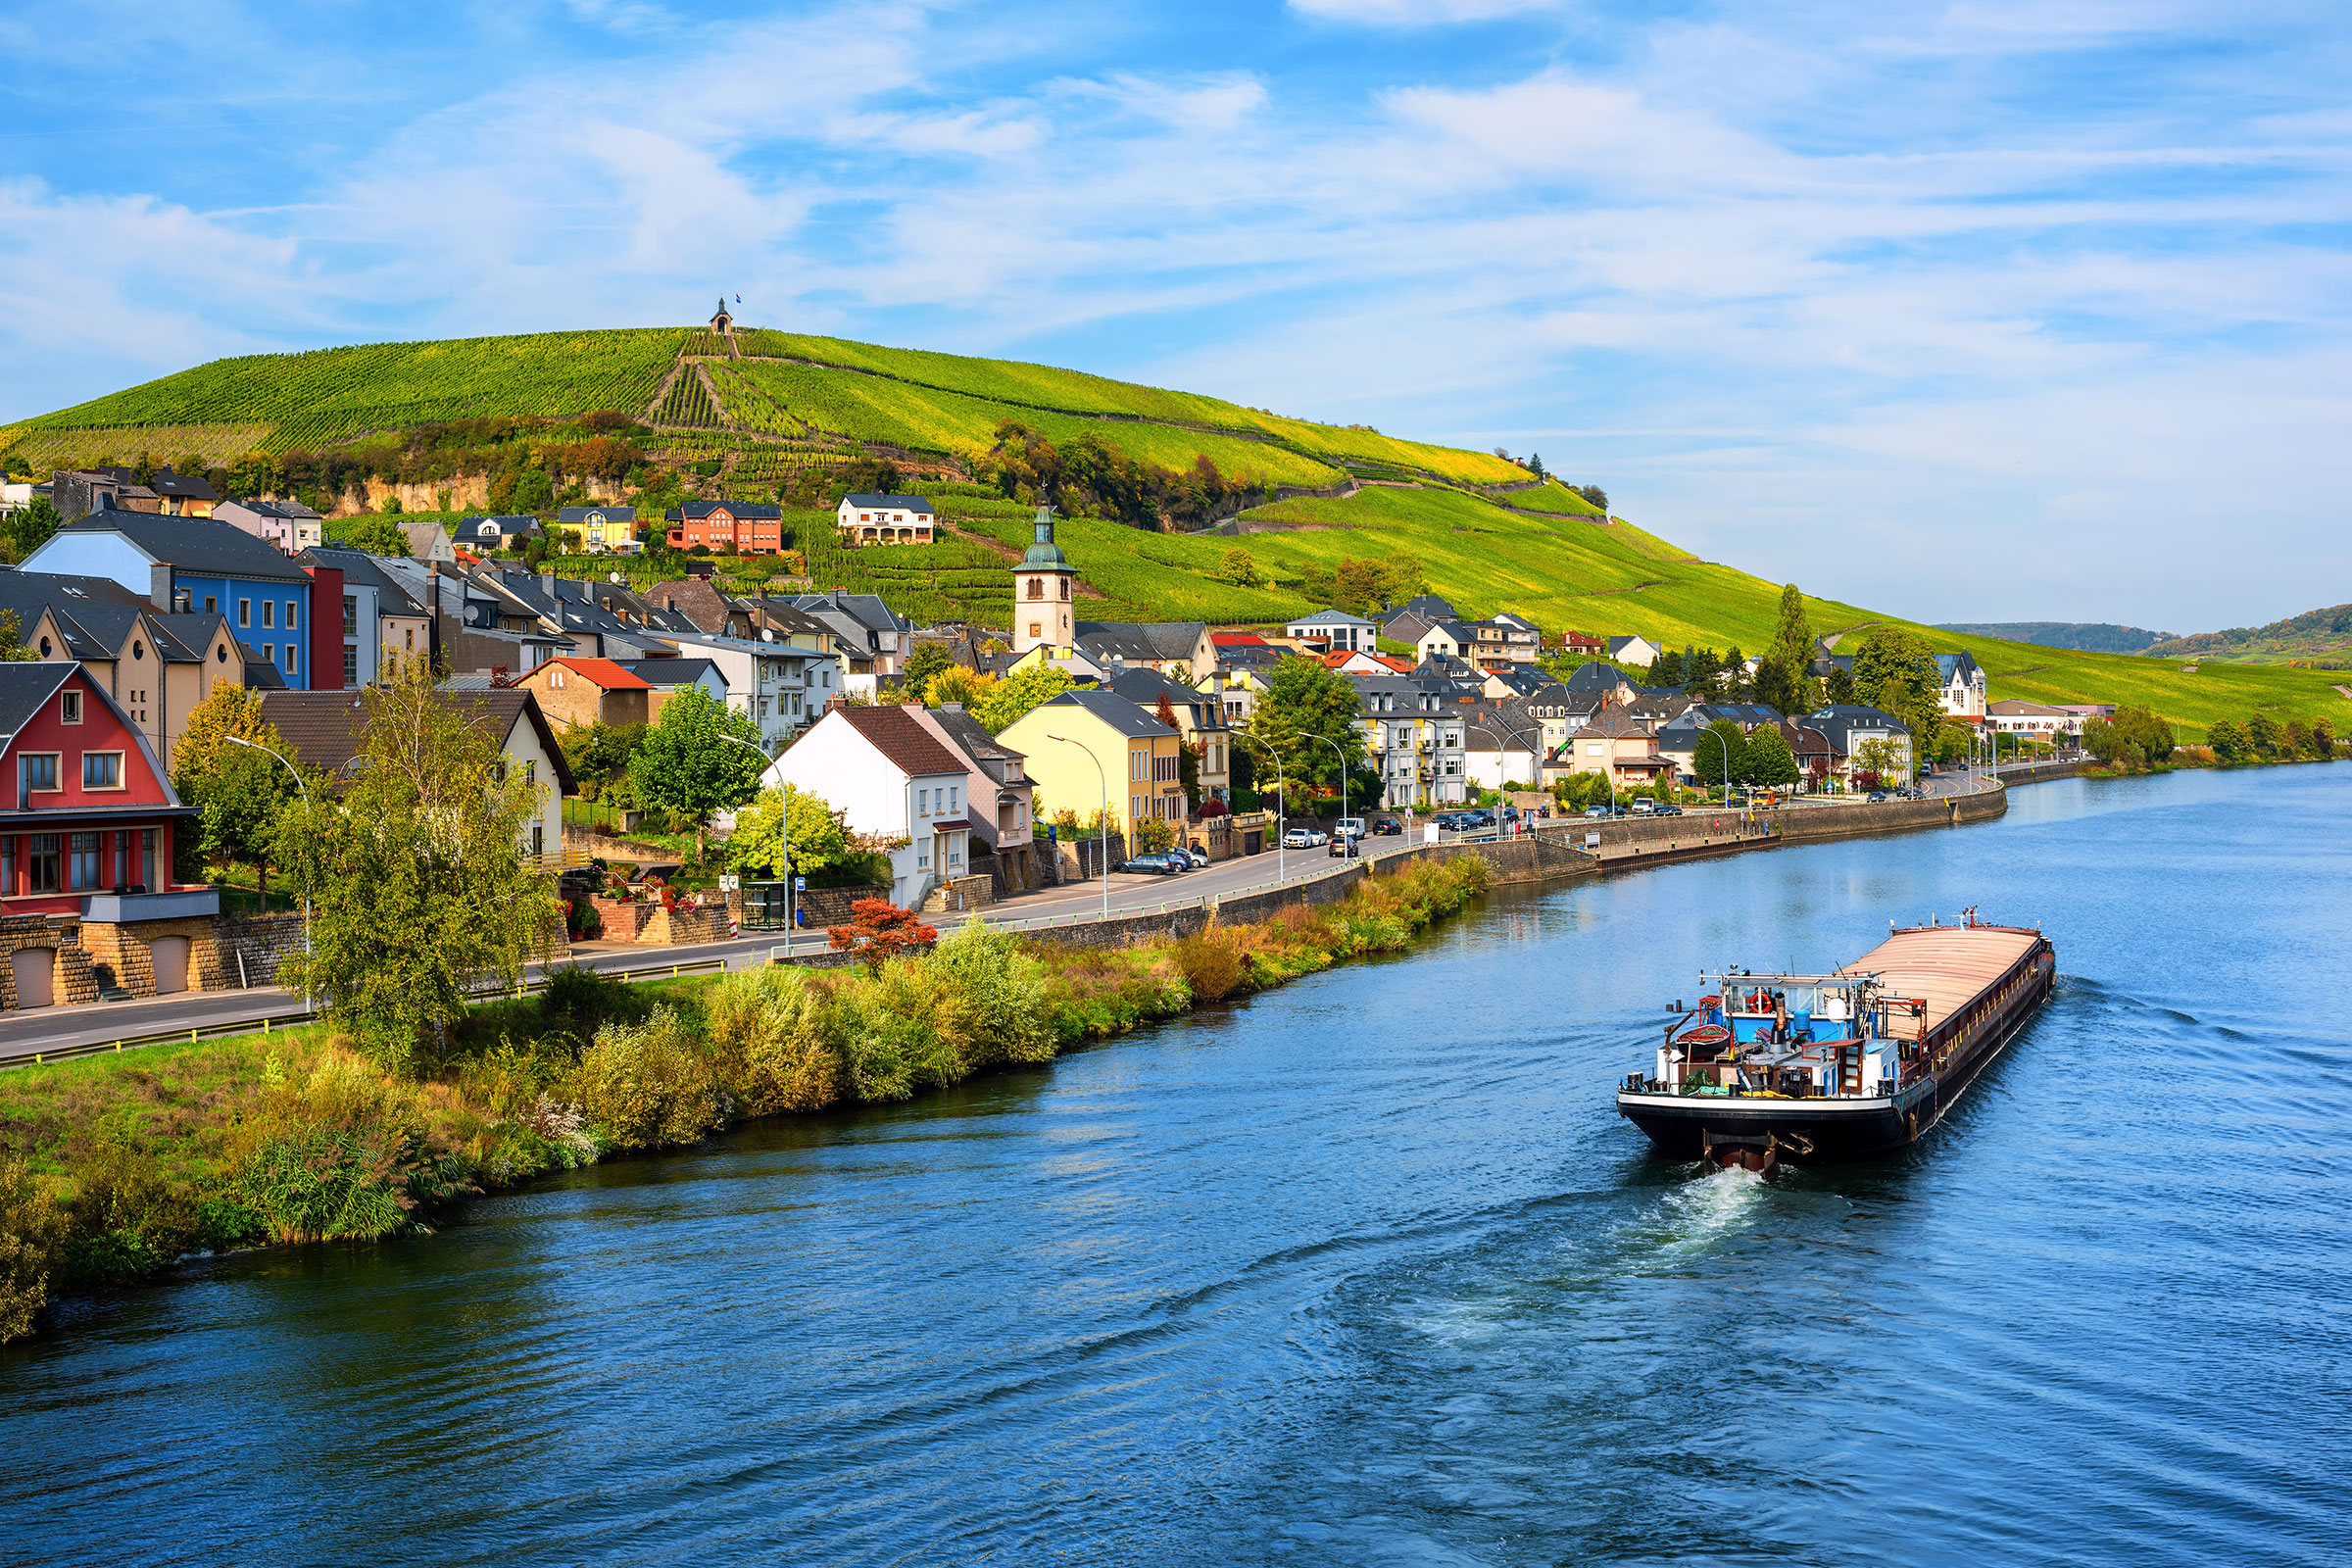 Moselle river by Wormeldange, Luxembourg country, with vineyard hills and a cargo barge ship